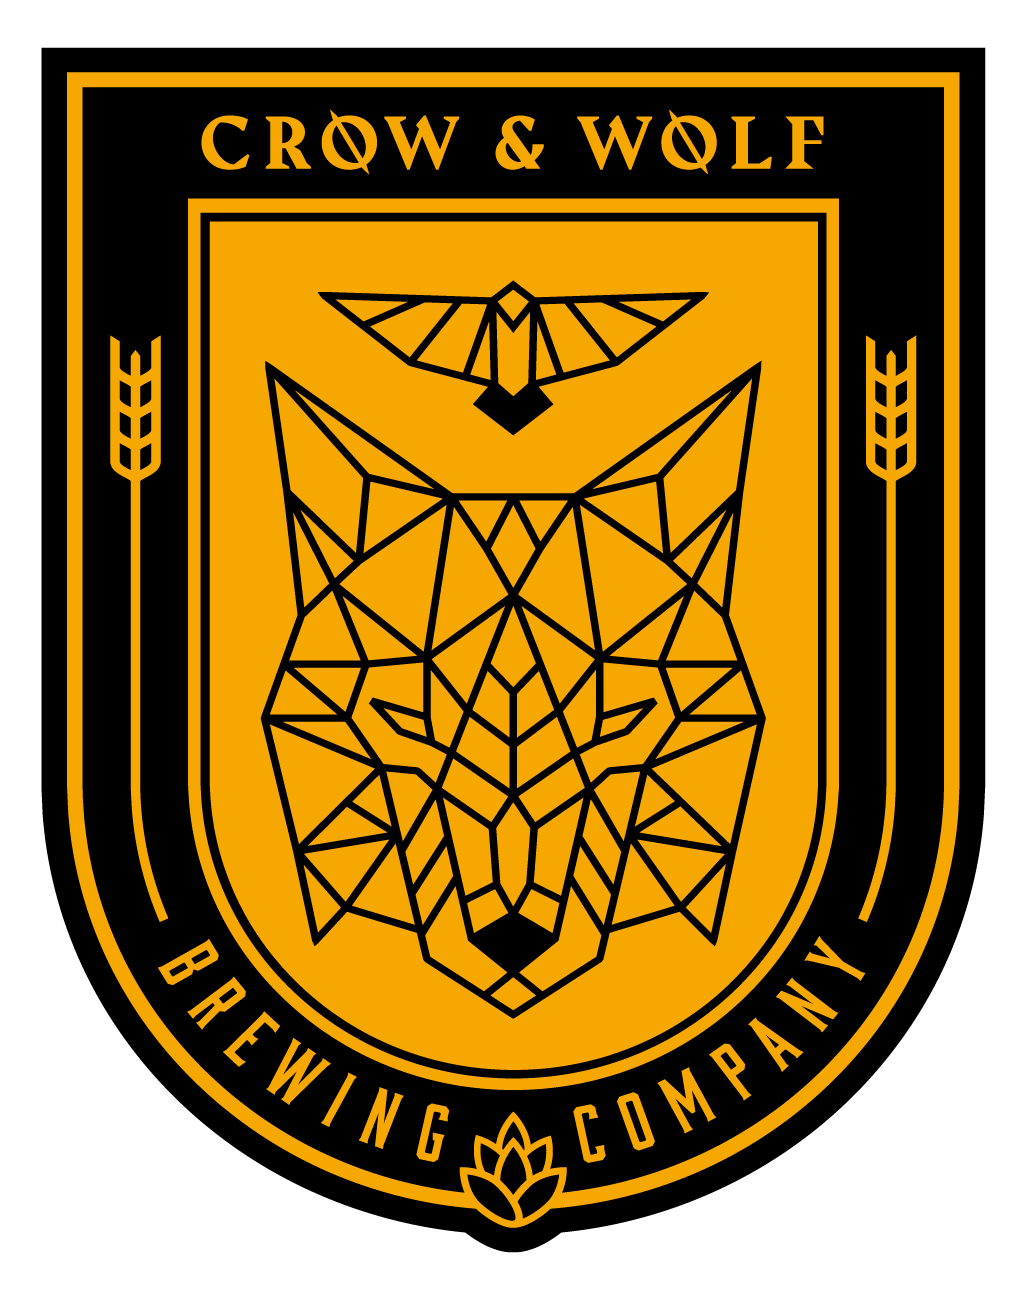 Crow and Wolf Brewing Co